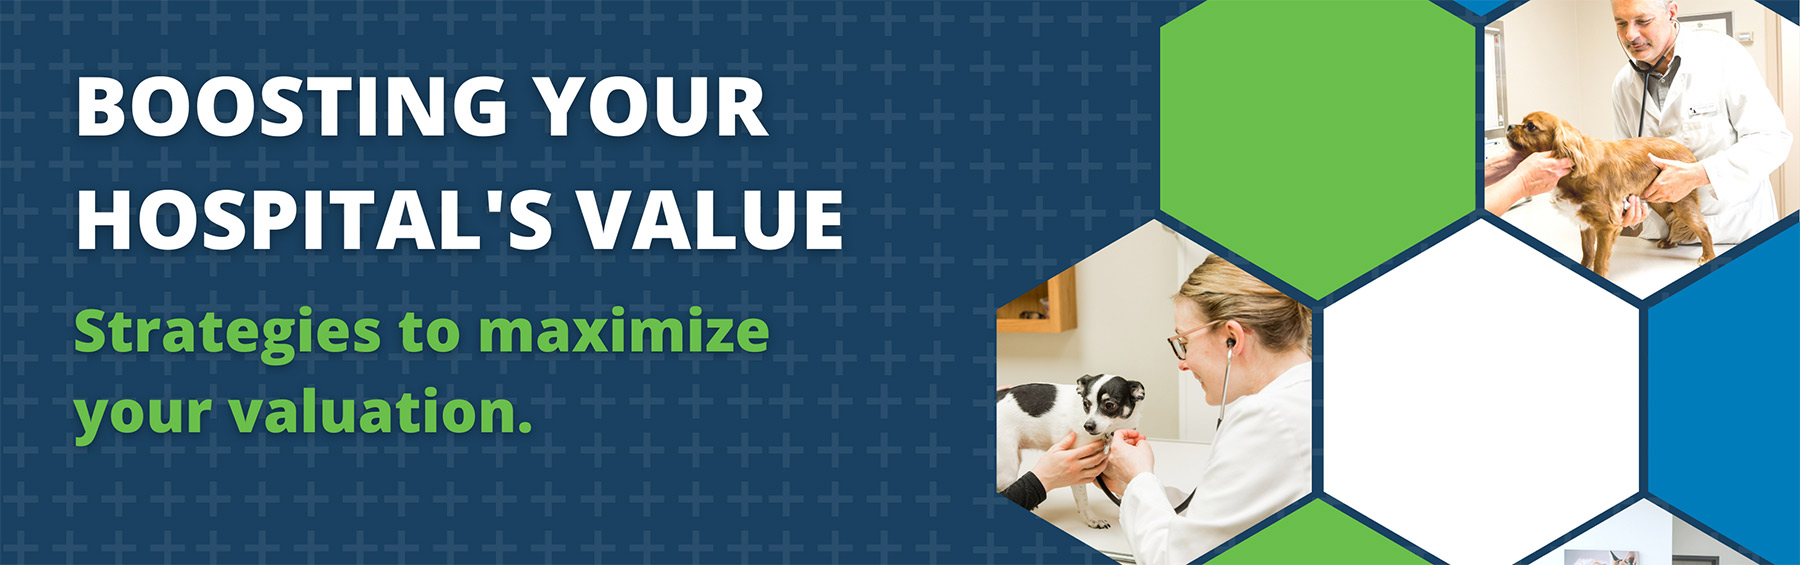 Boosting Your Hospital's Value: Strategies to maximize valuation